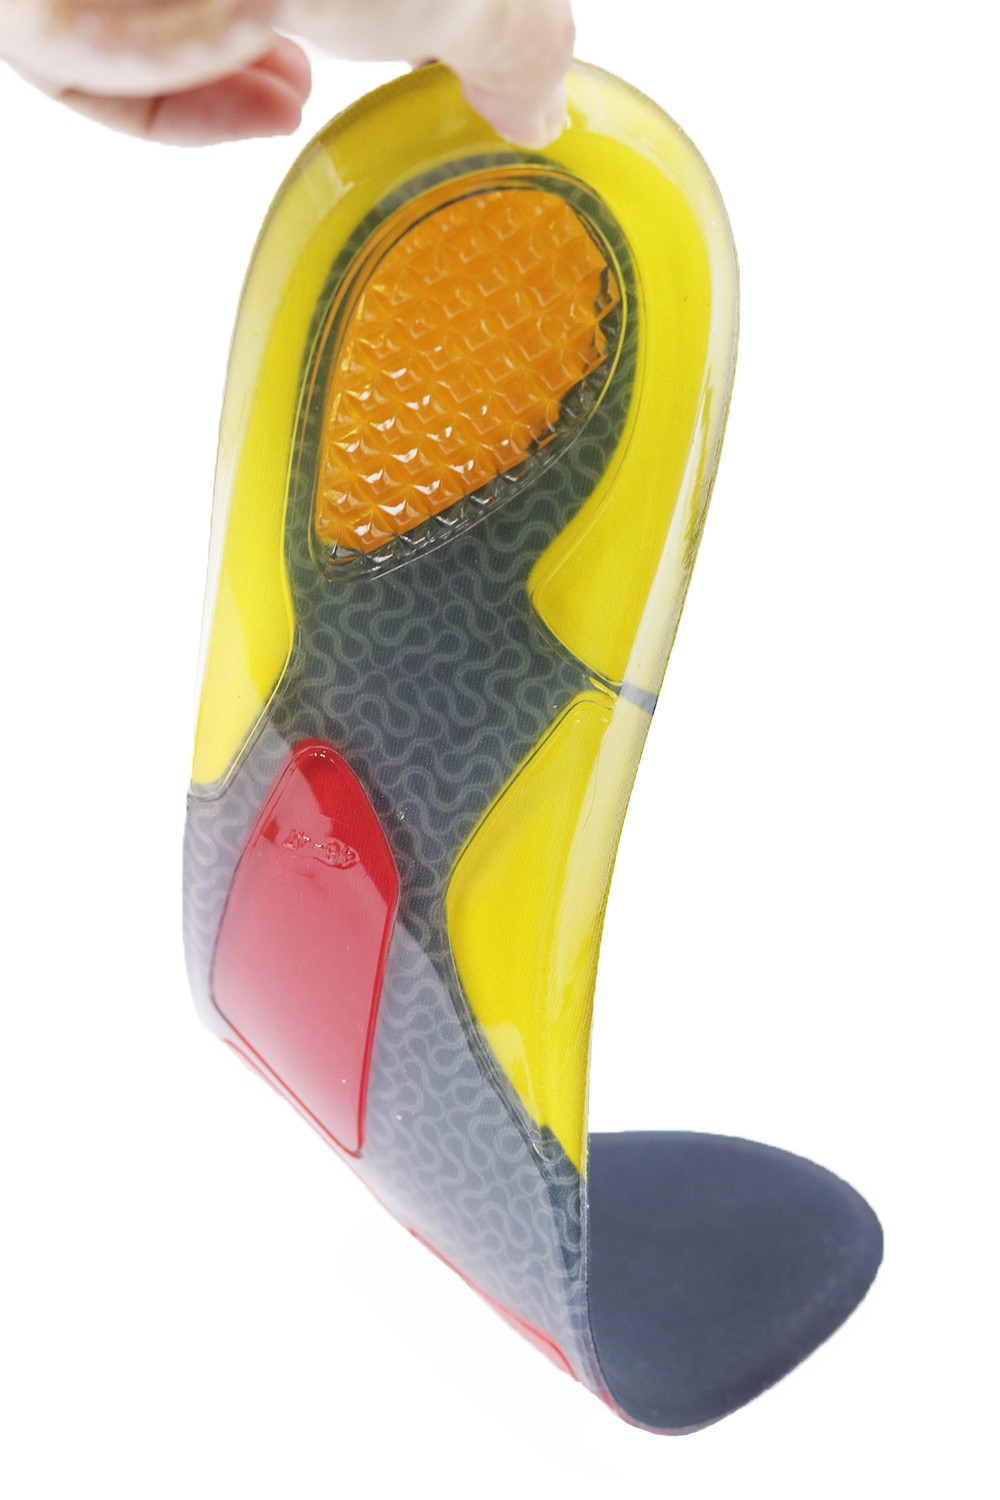 S-King High-quality ladies gel insoles factory for foot care-5